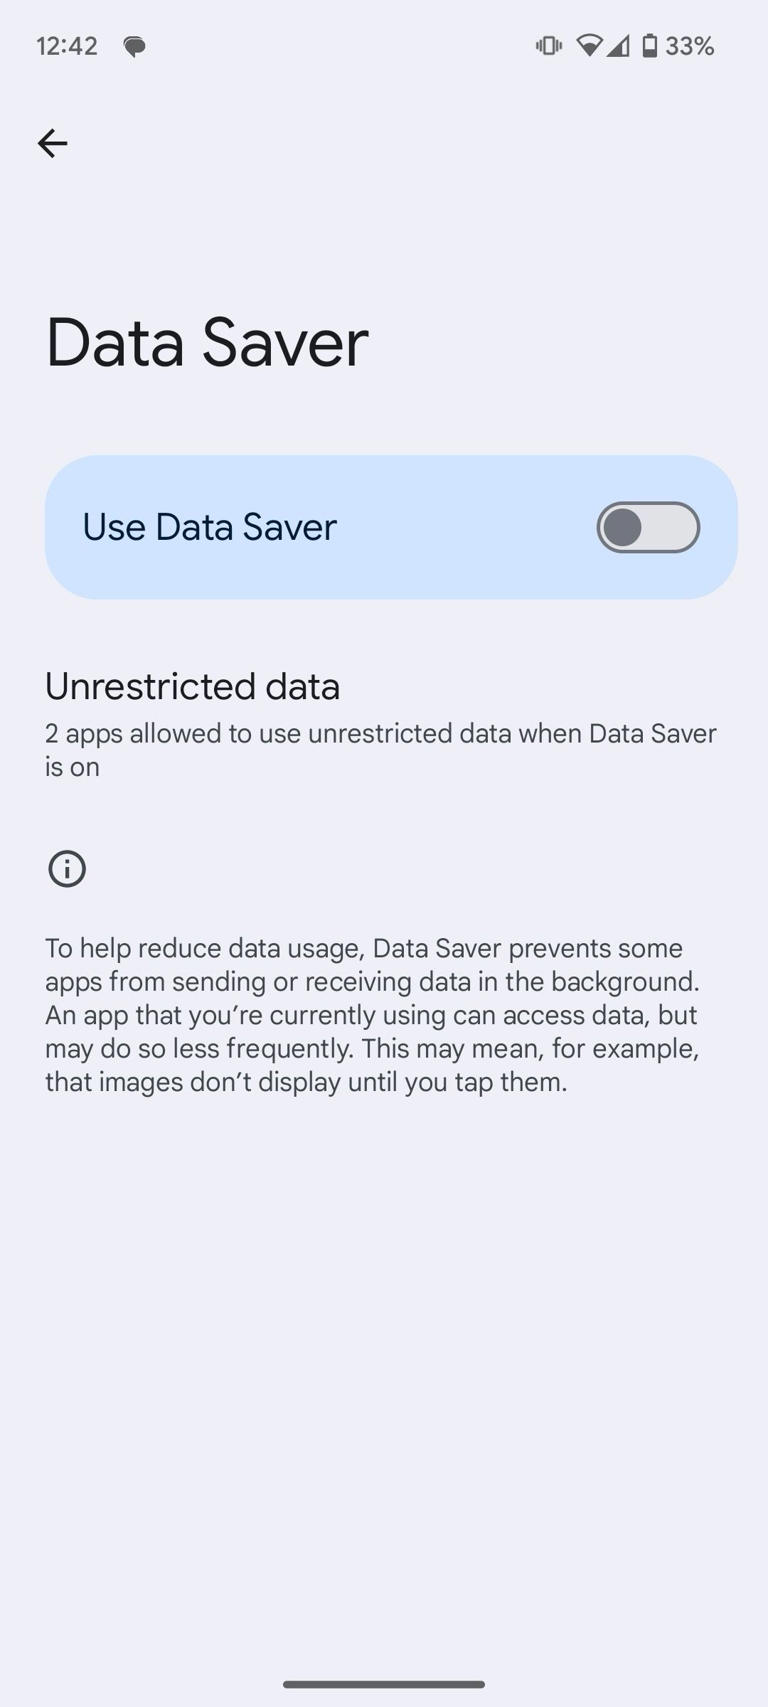 Unrestricted data apps and use data saver toggle on Android